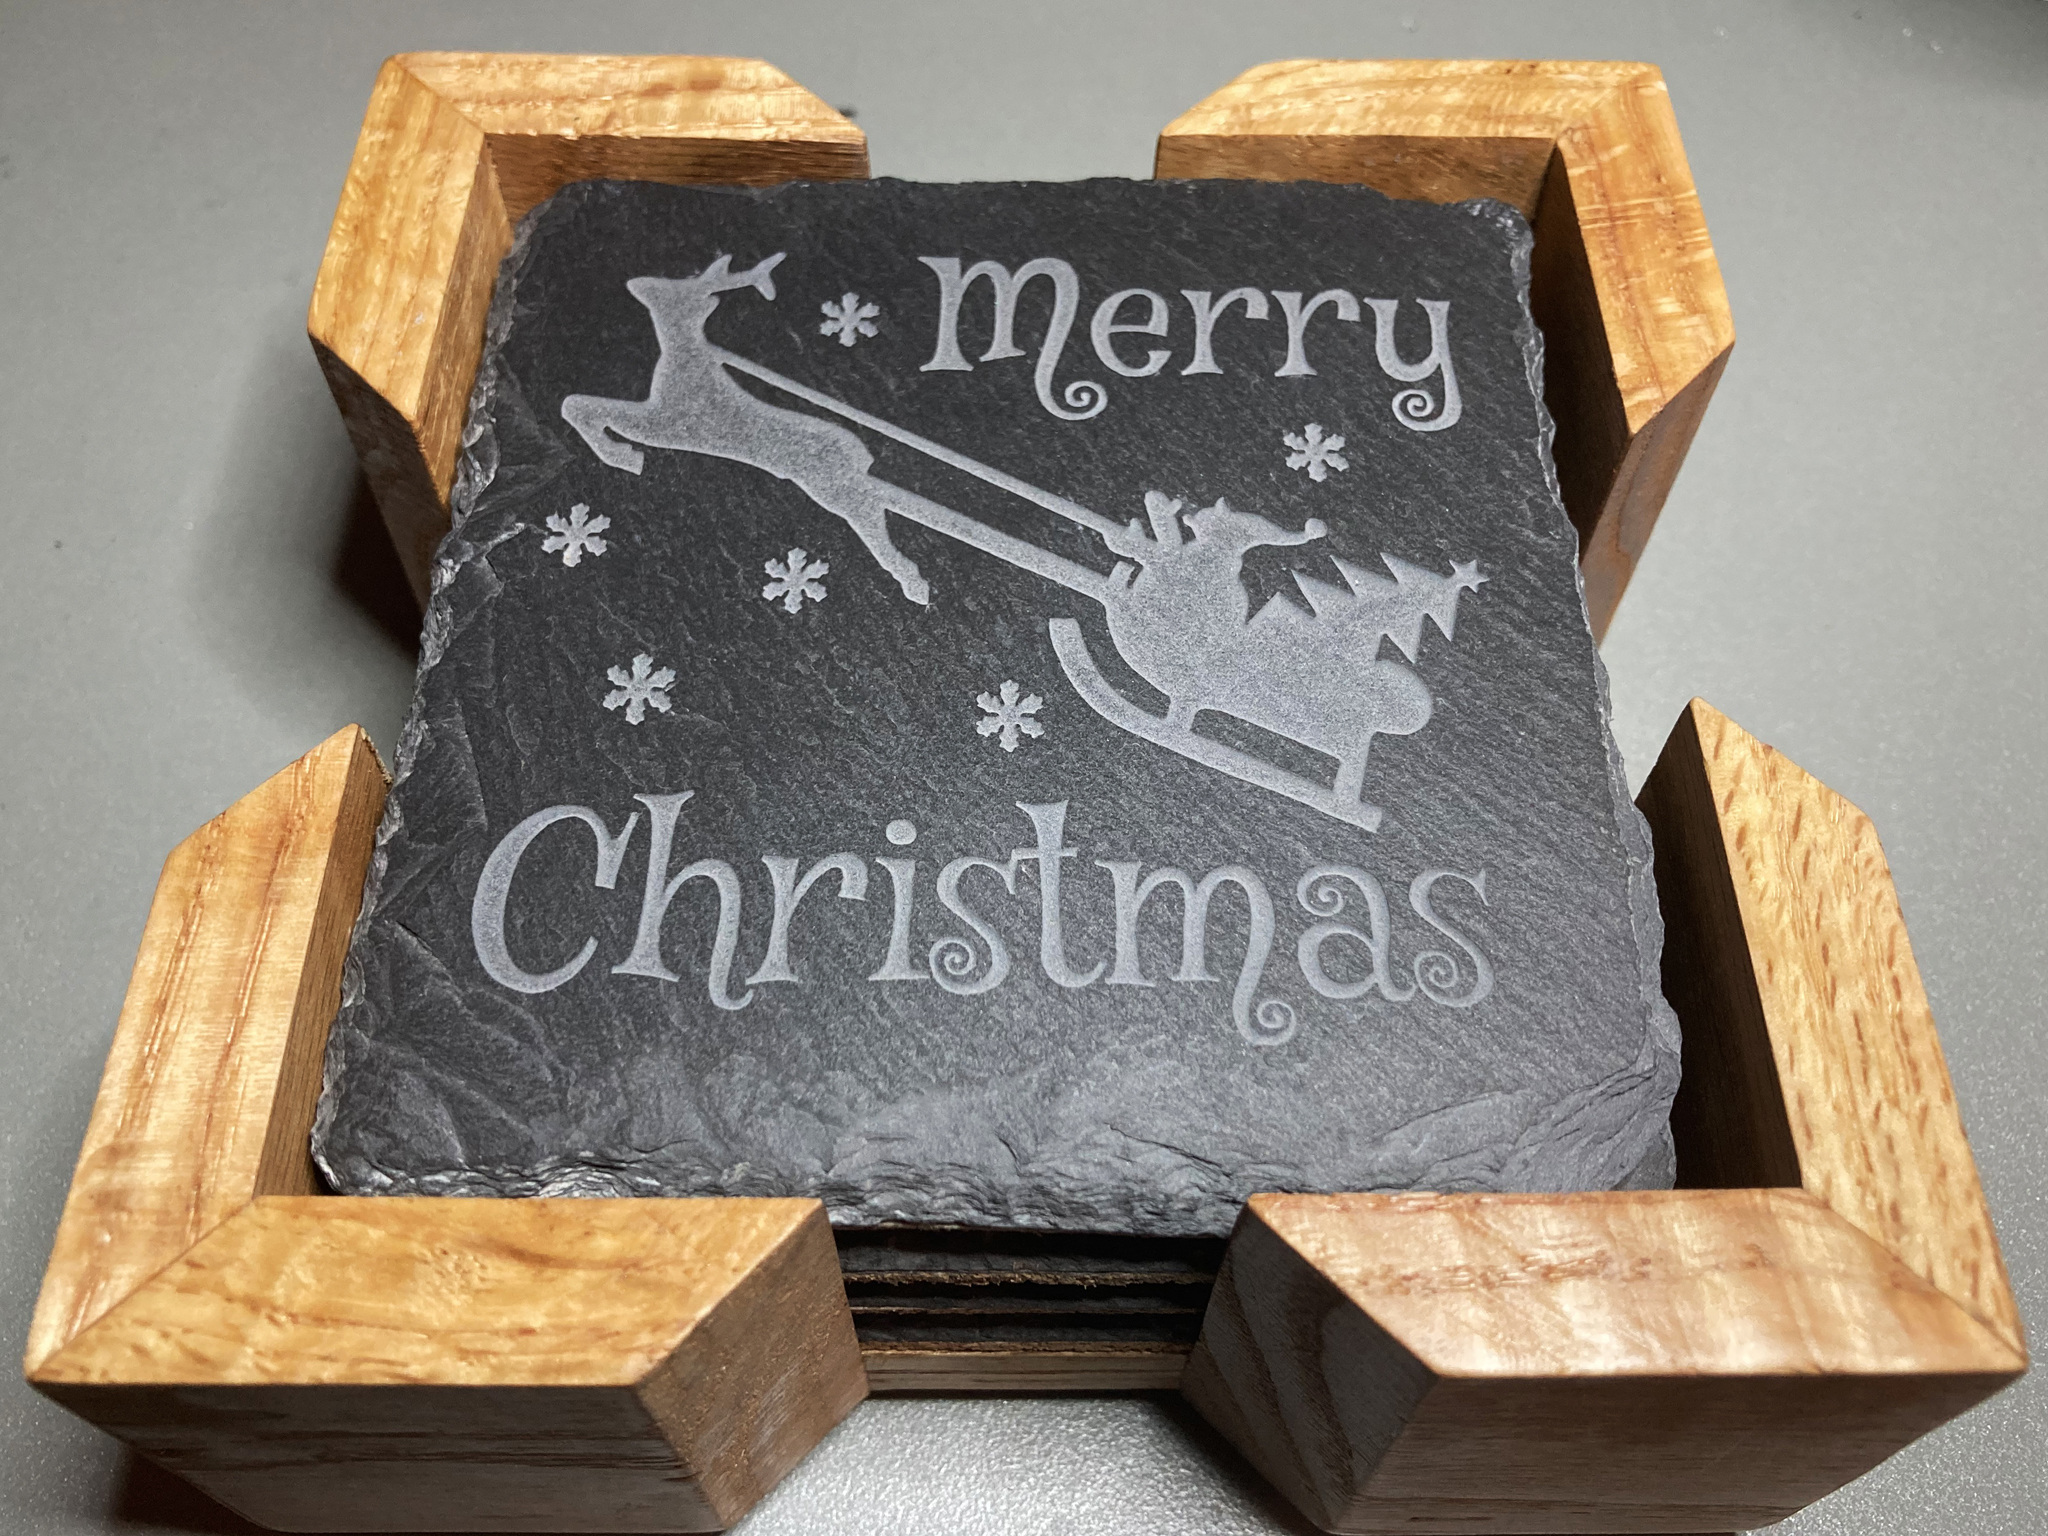 Merry Christmas Coaster. A great gift for the holidays. Get a set for entertaining guests.  Carved to a depth and quality that cannot be achieved with simple engraving.  Buy as a single, or mix and match in sets of 2 or 4.  Add a Coaster Holder and/or Gift Box. Each sold separately.